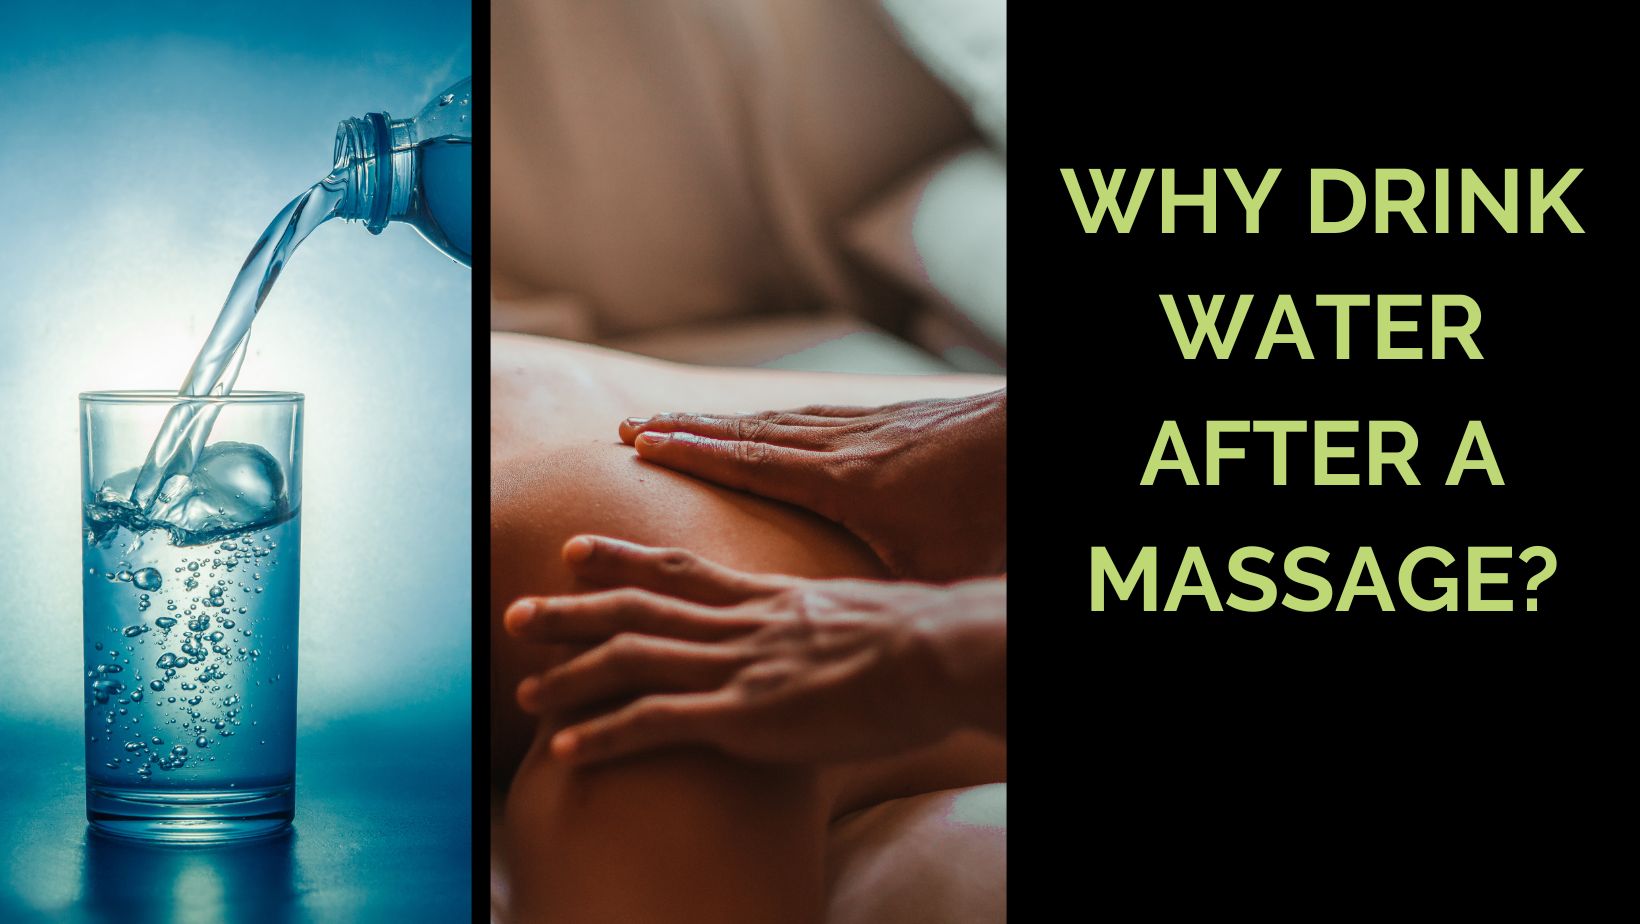 Why Drink Water After A Massage